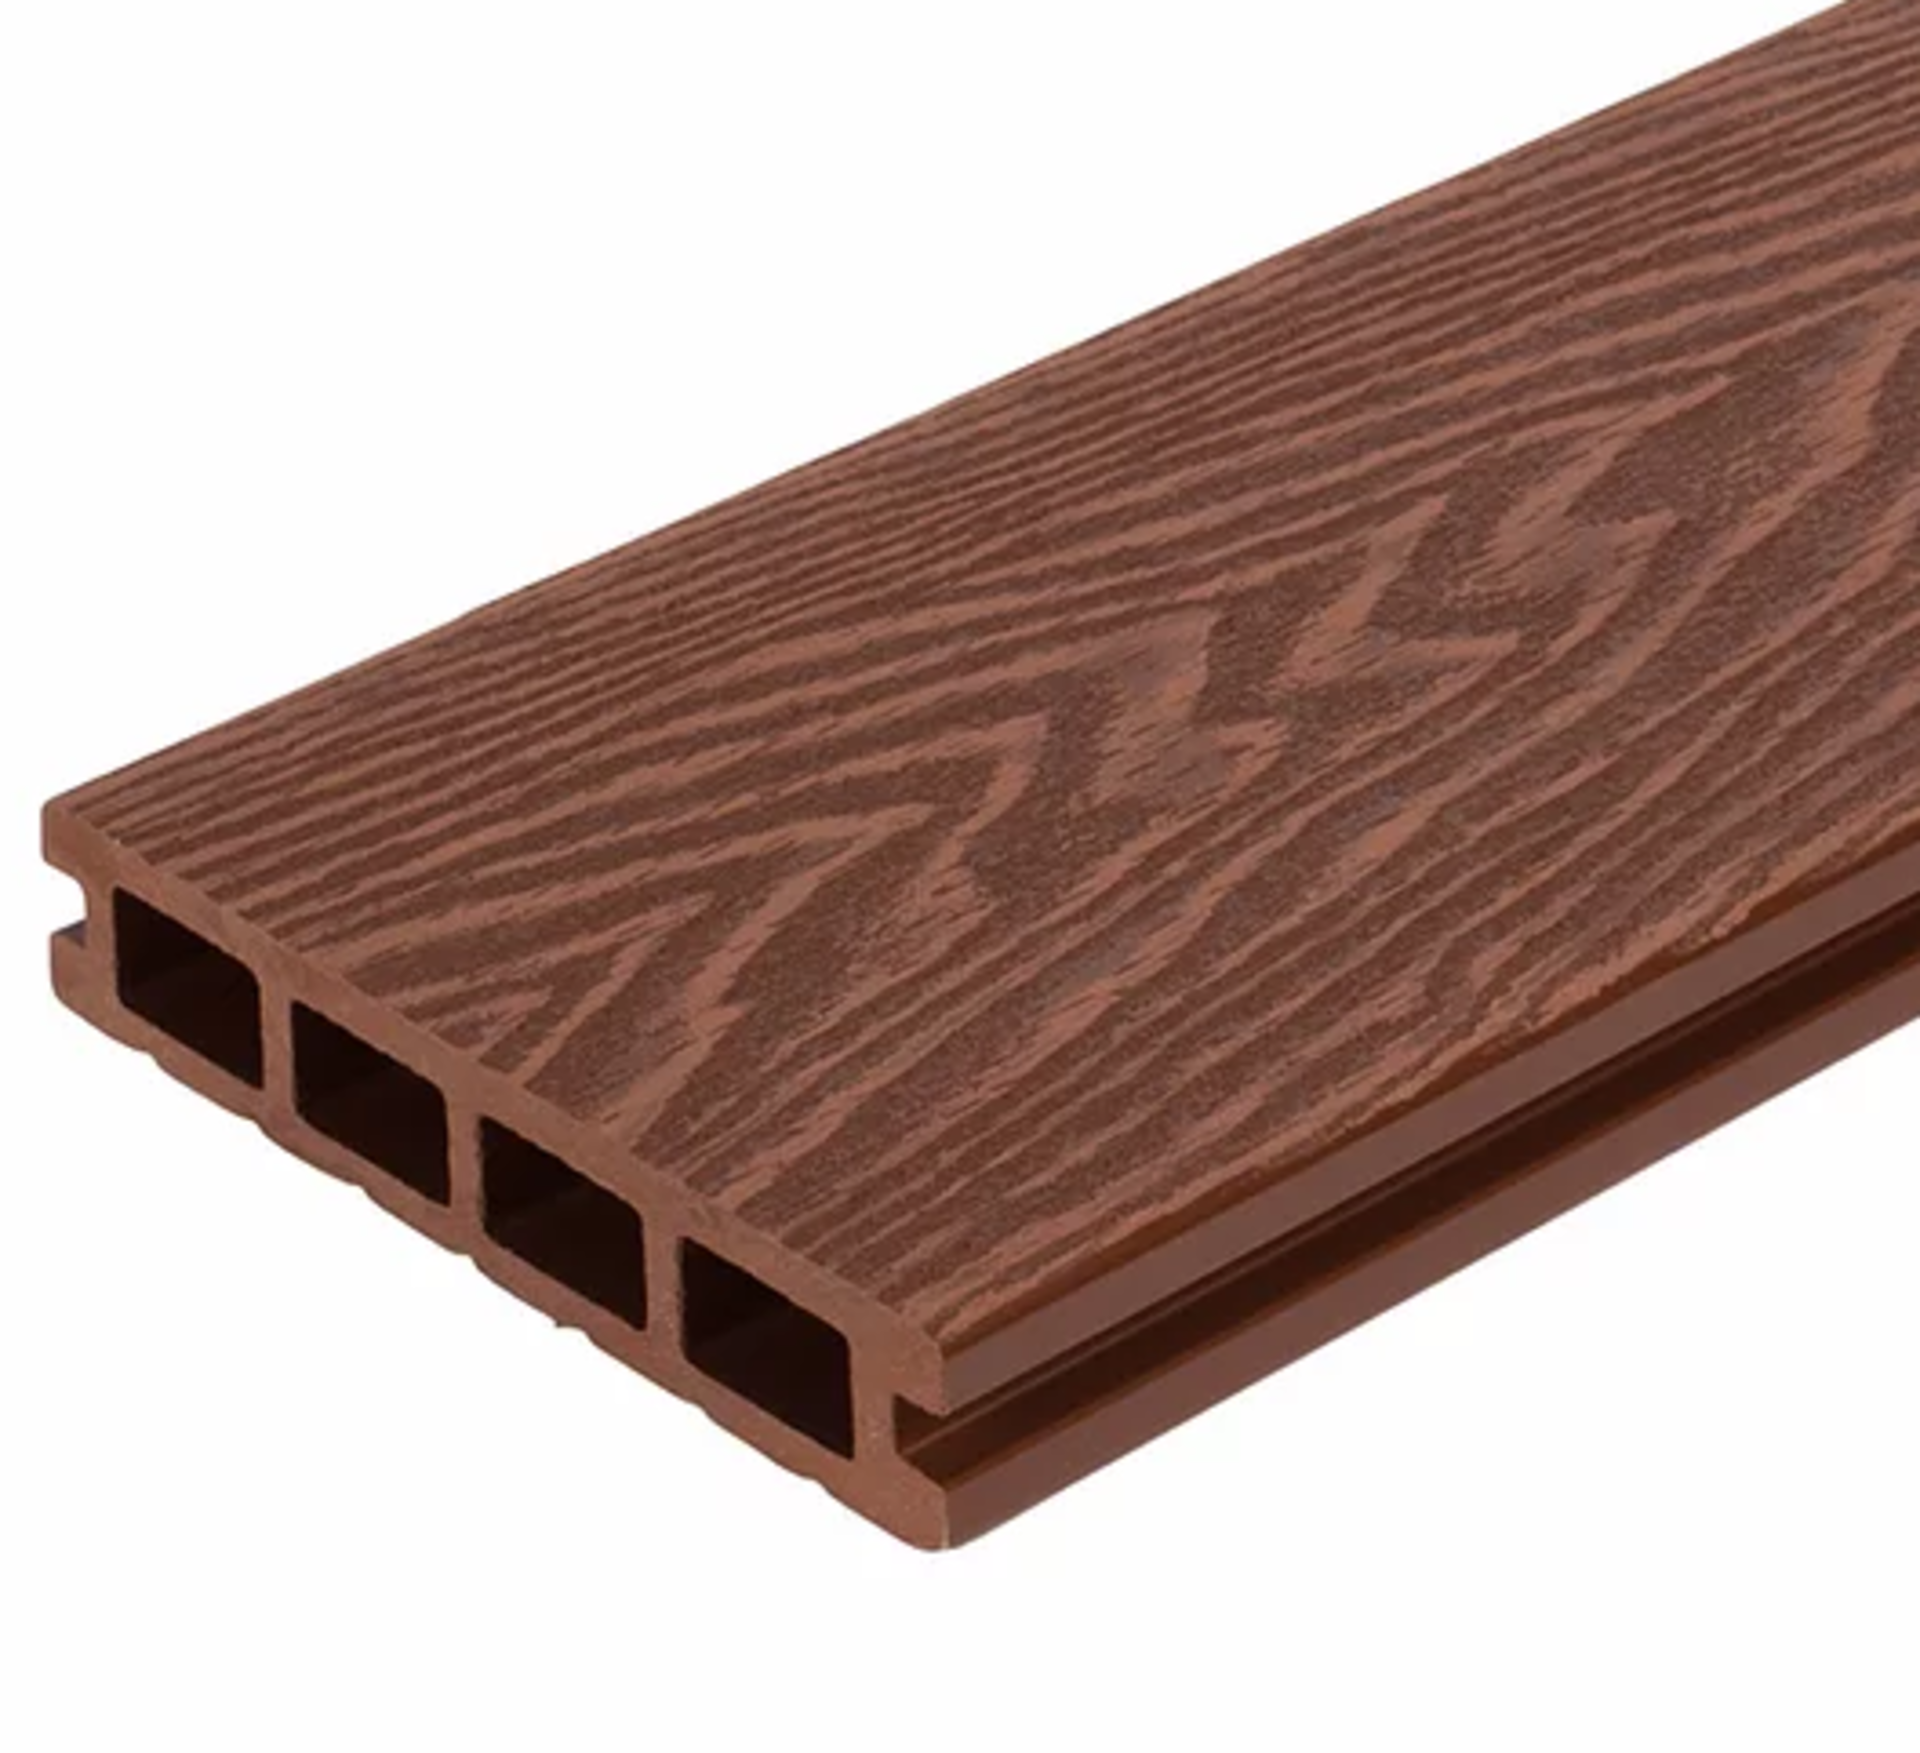 * 20 WPC Composite Coffee Double sided Embossed Woodgrain Decking Boards 2900mm x 146mm x 25mm - Image 3 of 5